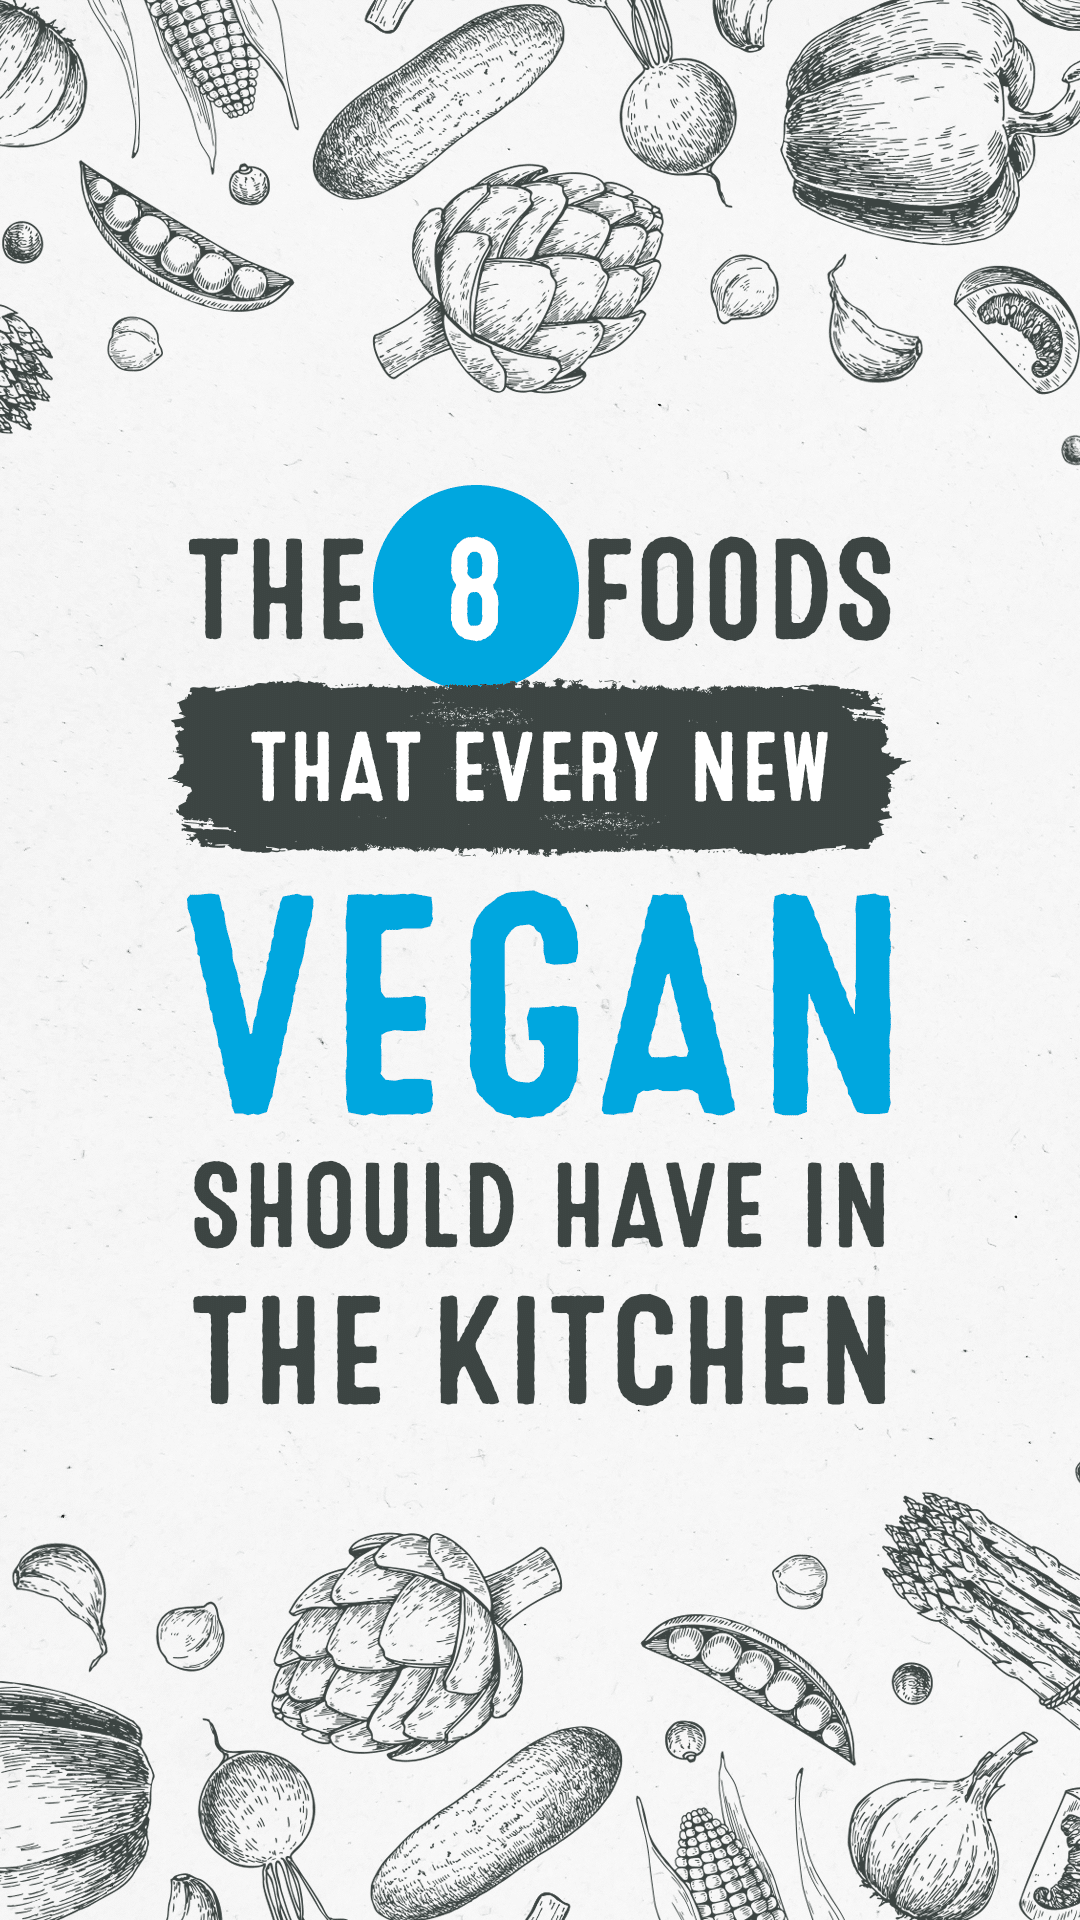 The 8 Foods Every New Vegan Should Have in the Kitchen